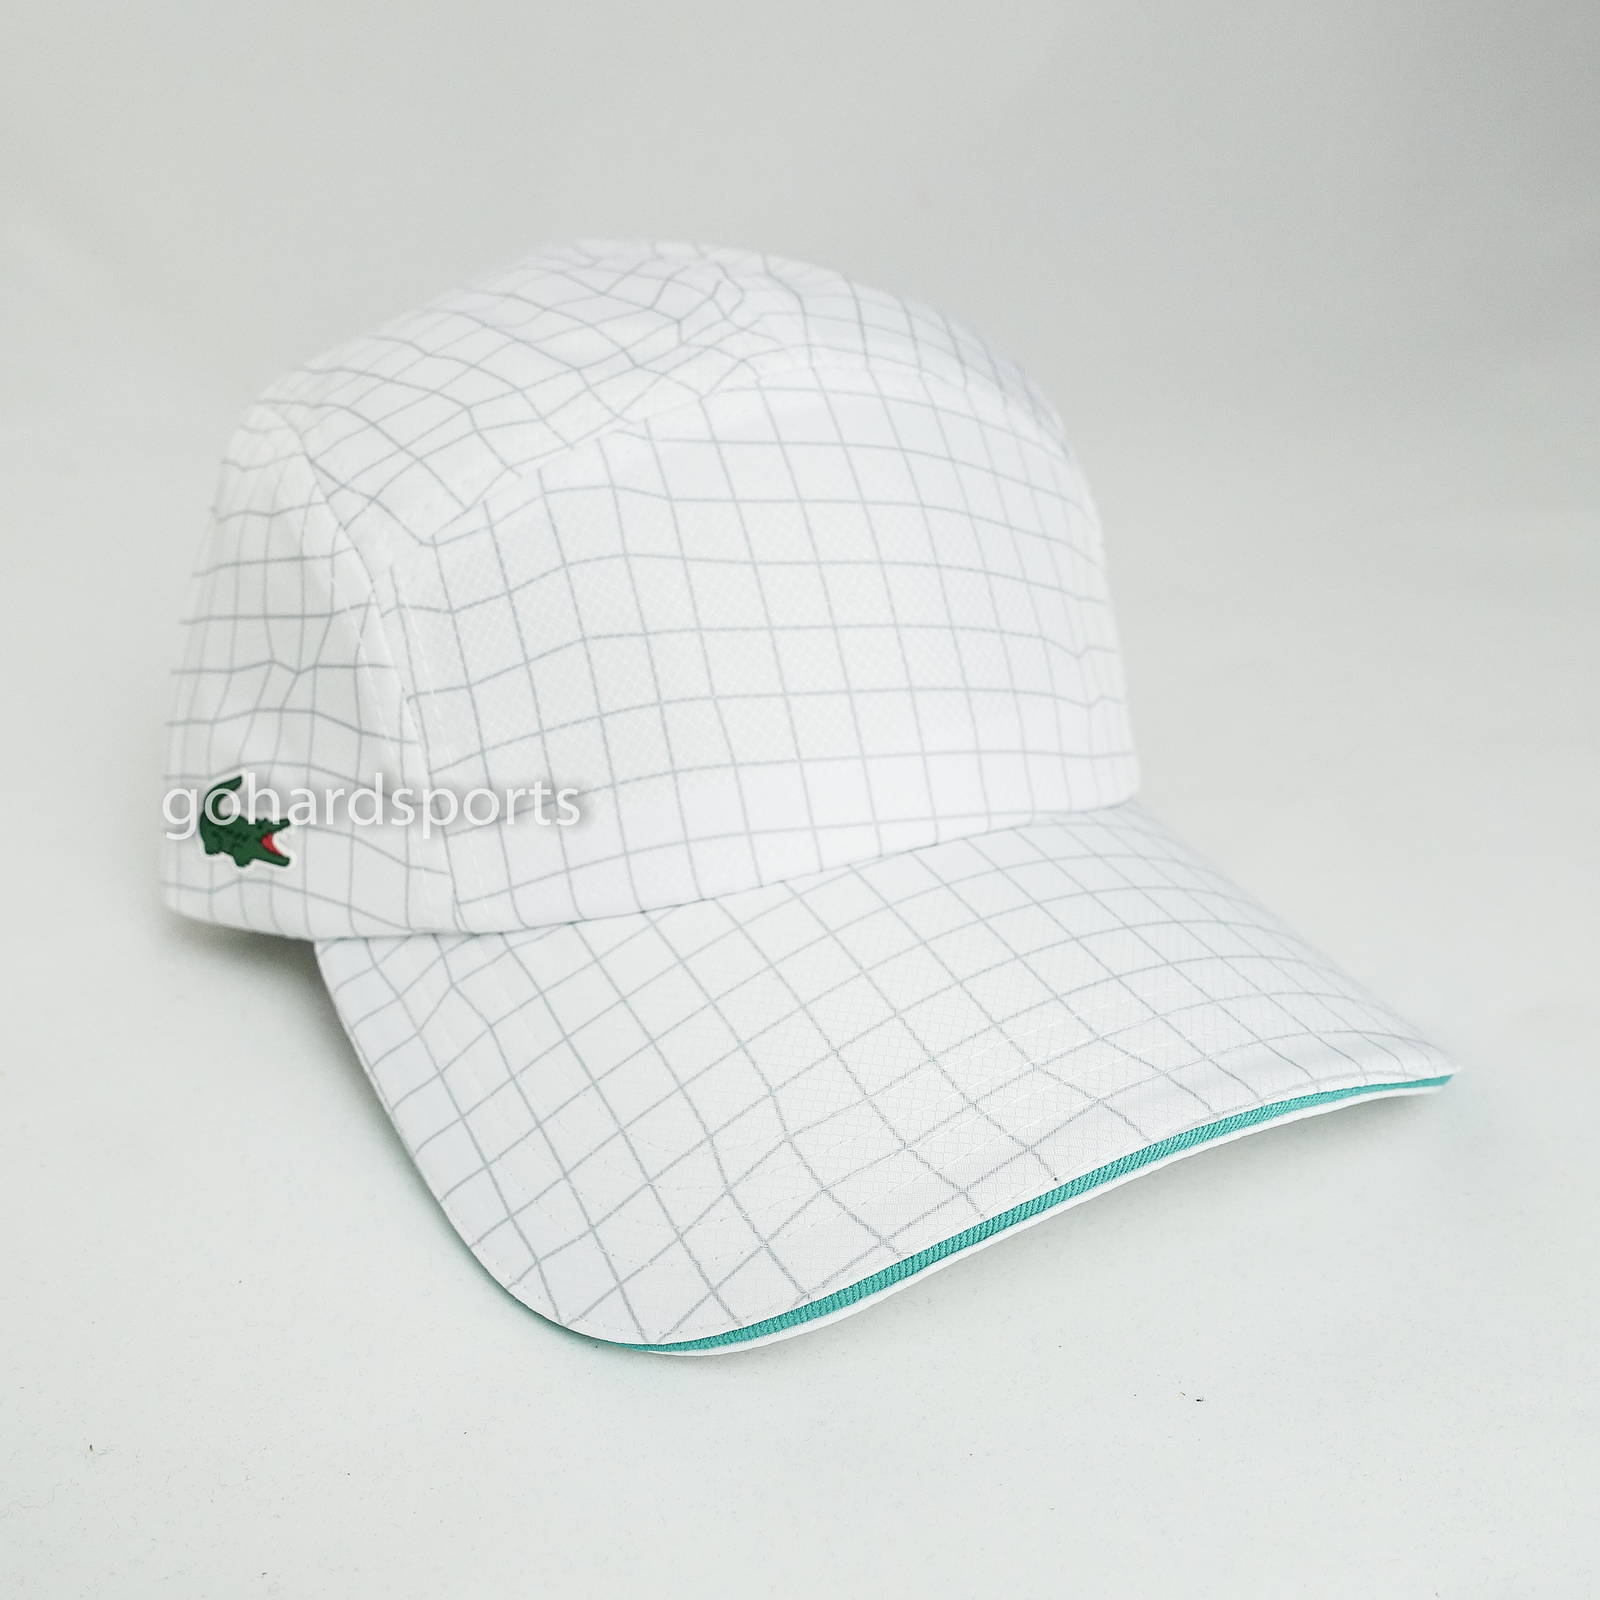 Lacoste Limited Edition Dri-Fit Cap in 